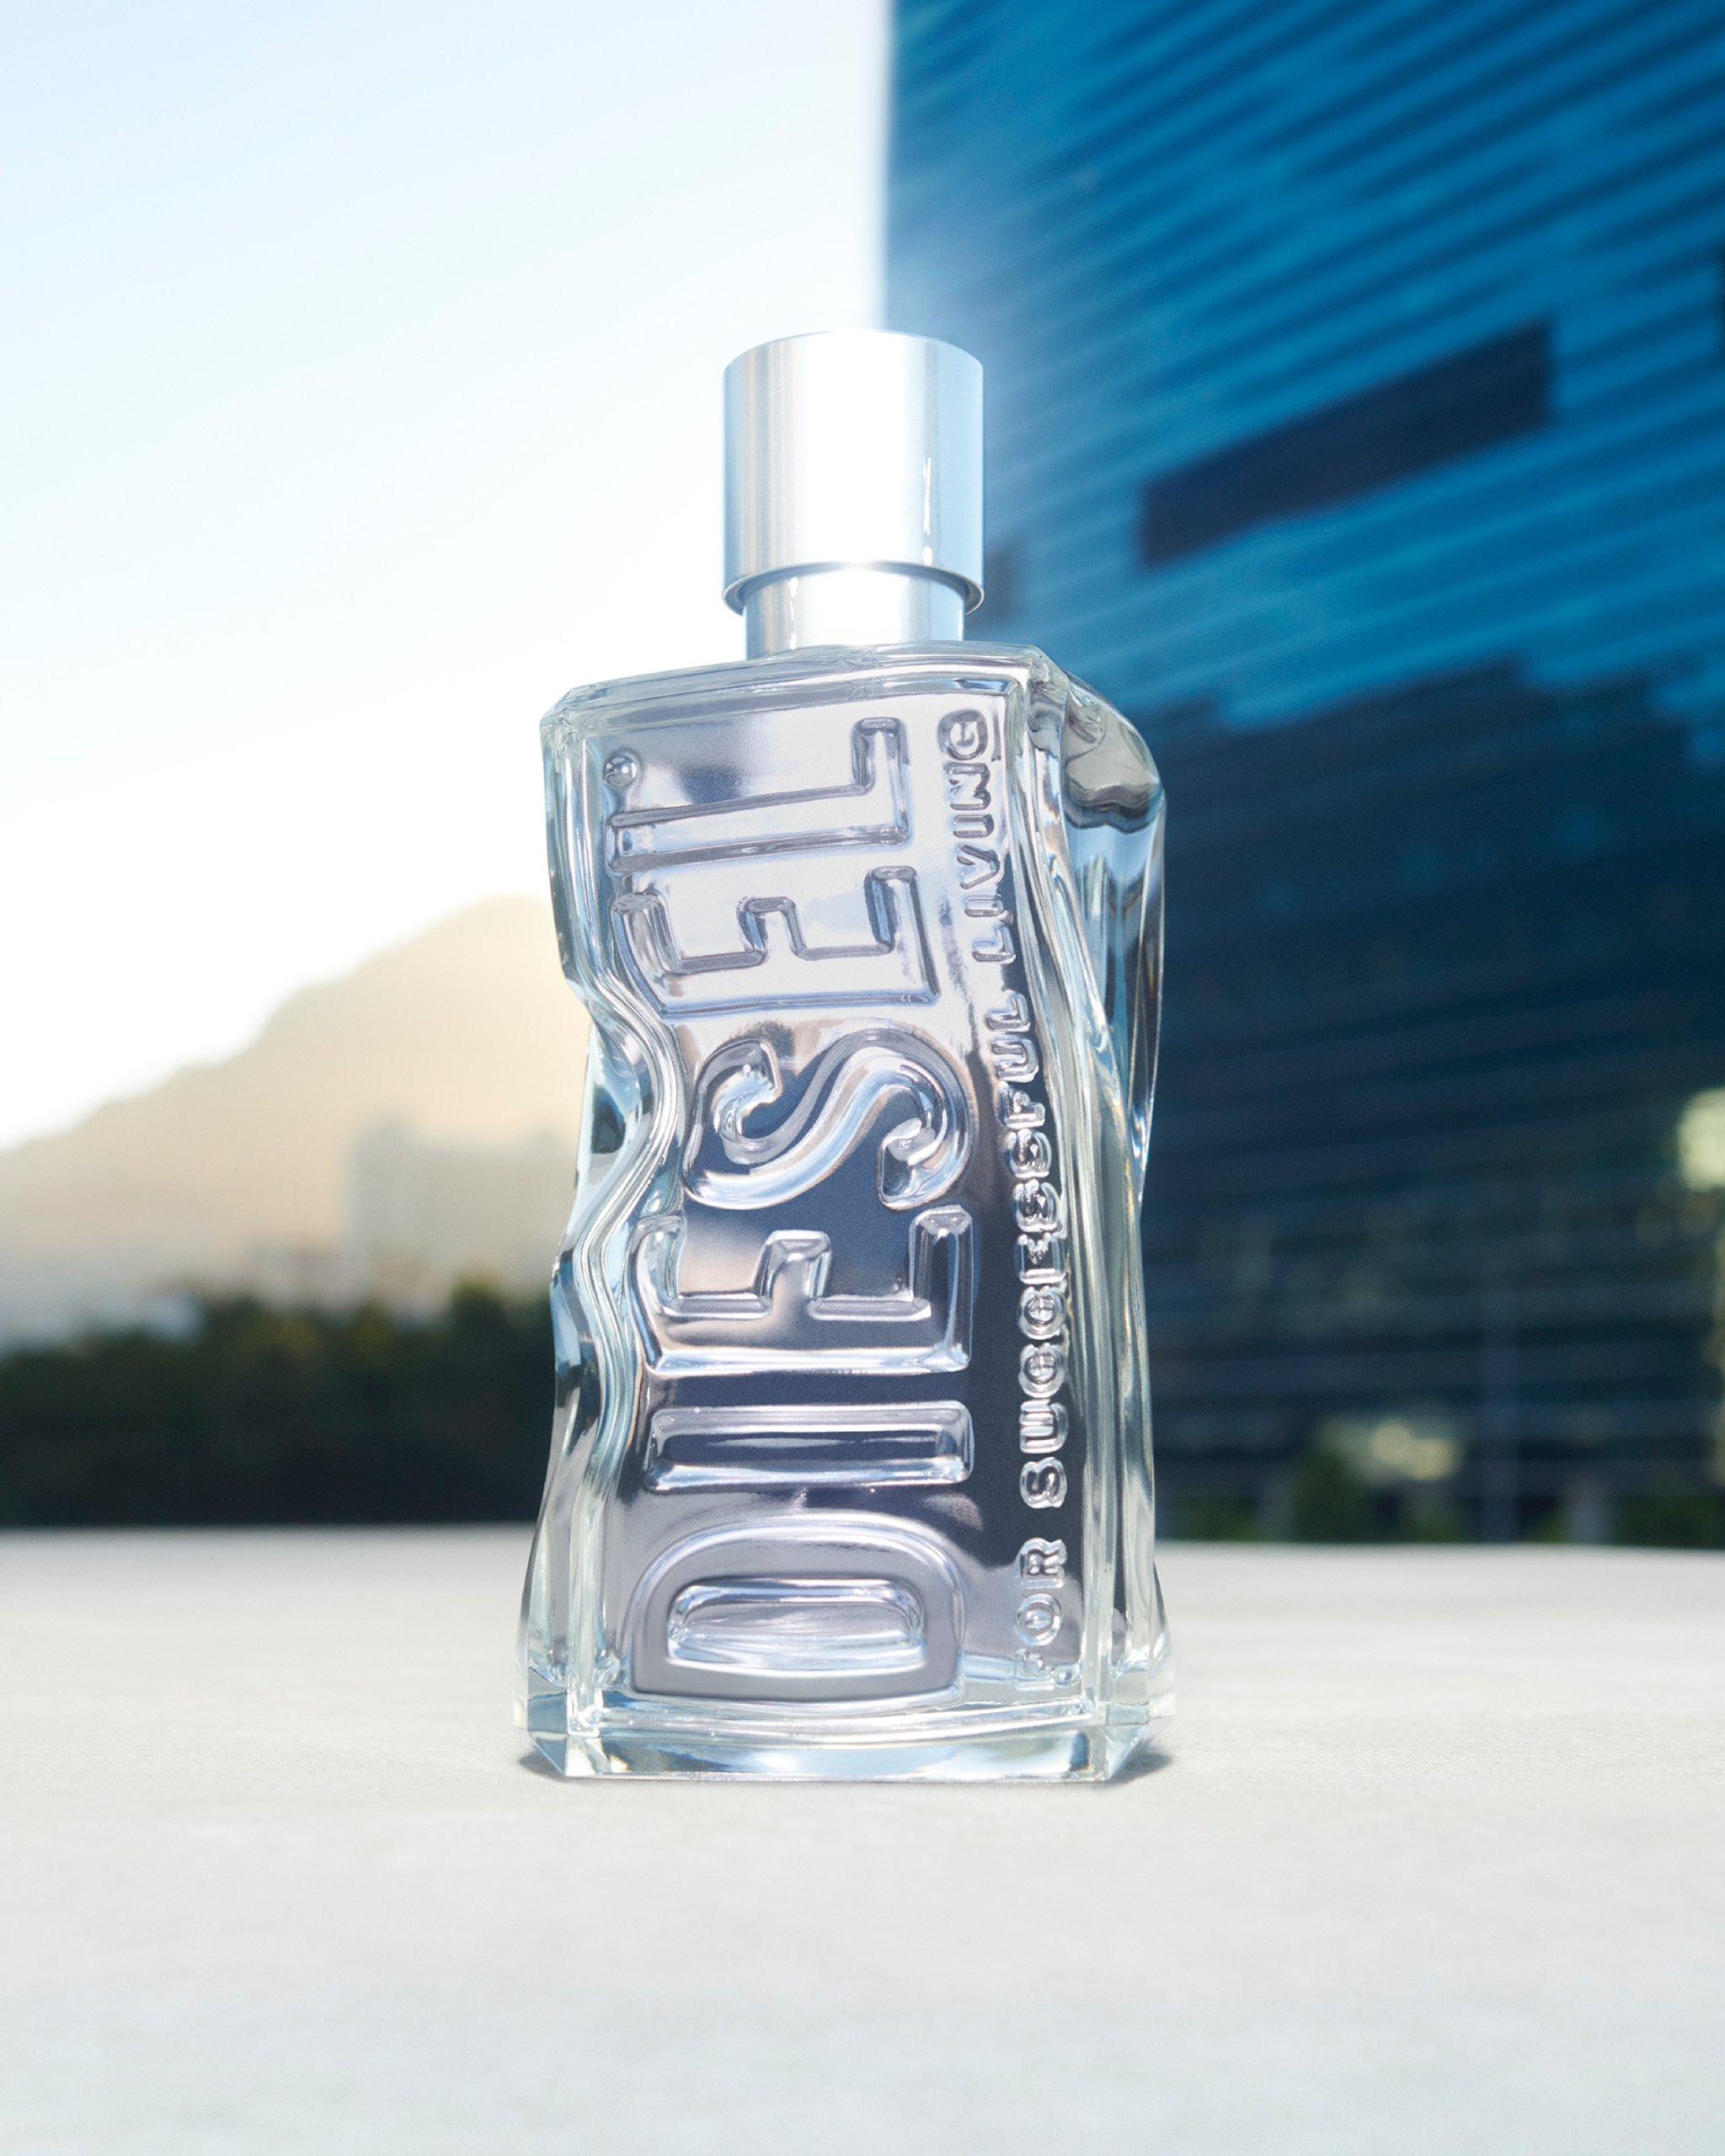 LOW_D-BY-DIESEL---THE-NEW-FRAGRANCE_PRODUCT-GLORIFICATION-STILL-LIFE-_PR-CROPS_DI766_LOREAL-FRAGRANCE-22_DIGITAL-CAMPAIGN_PRODUCT-GLORIFICATION_PR-CROPS_72dpi_06